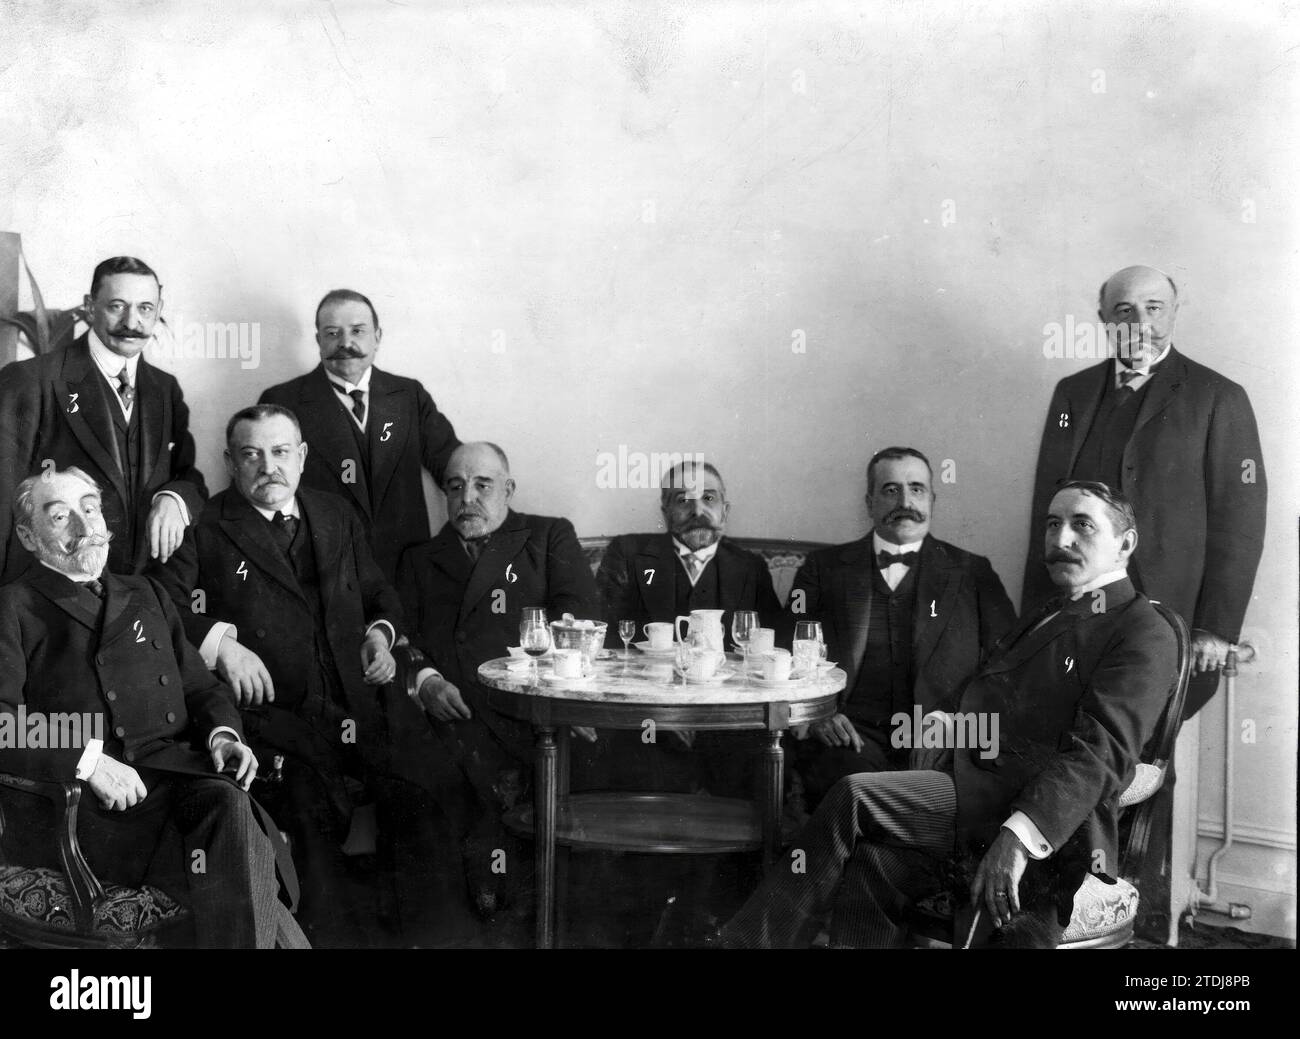 02/08/1911. Yesterday's ministerial banquet. The president of the council Mr. Canalejas (1) and the Ministers Messrs. Salvador (2), García Prieto (3), Cobian (4), Ruiz Valarino (5), Arias de Miranda (6), Alonso Castrillo (7), Aznar (8) and Gasset (9), Celebrating Consejillo after the meal they had to celebrate the first anniversary of the coming to power of the Democratic Party. Credit: Album / Archivo ABC / Francisco Goñi Stock Photo